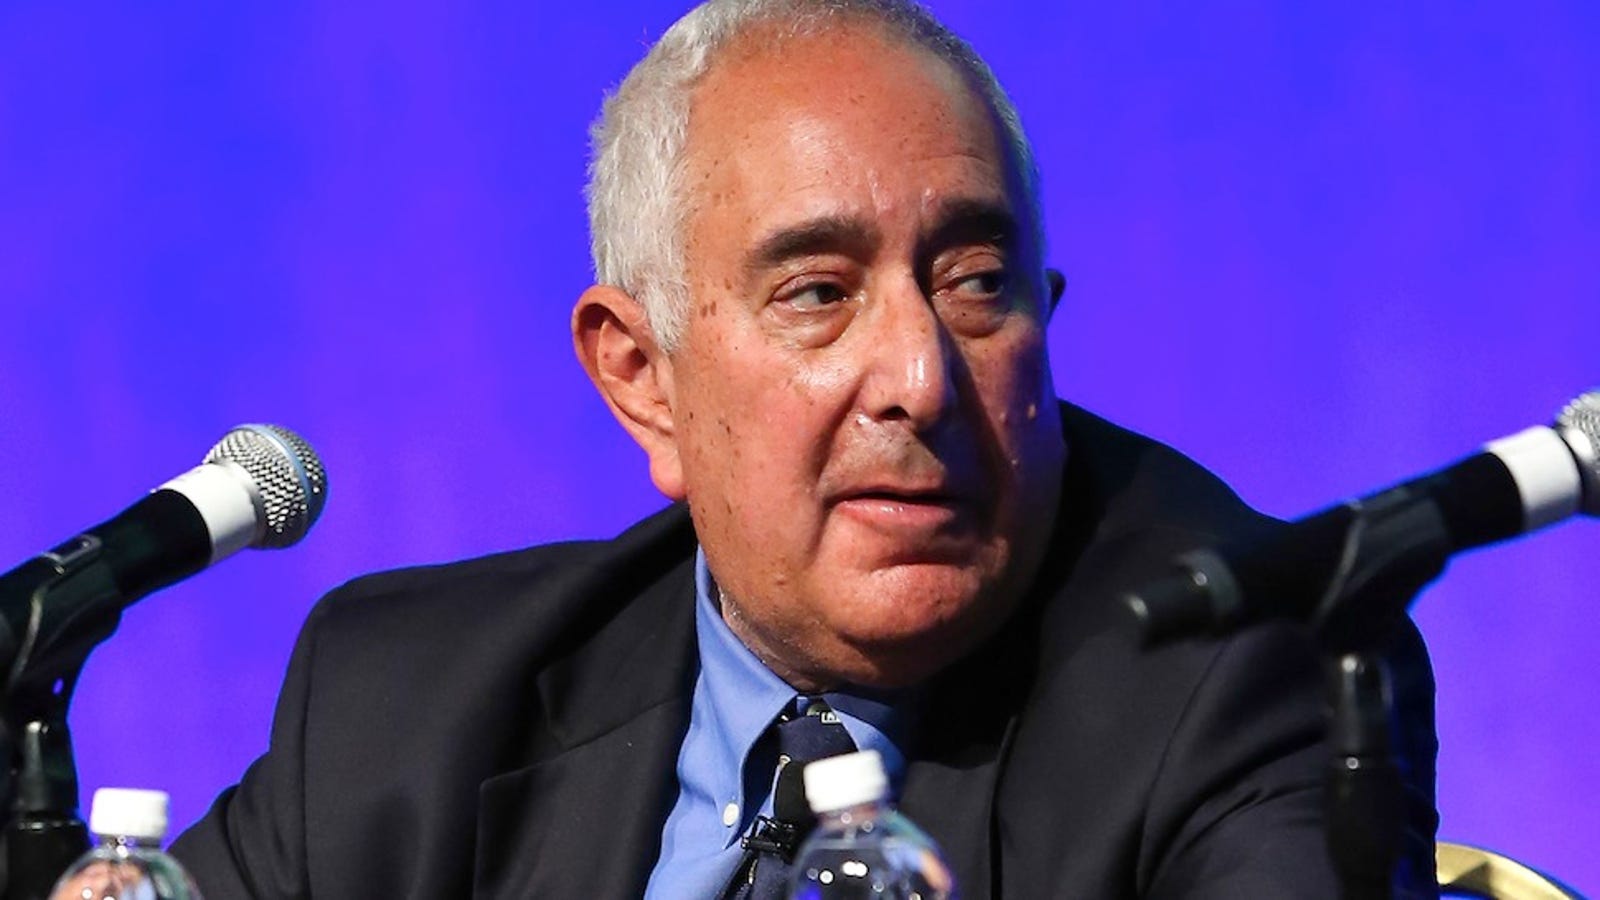 Super Creep Ben Stein Demanded Nude Photos From A Pregnant Woman